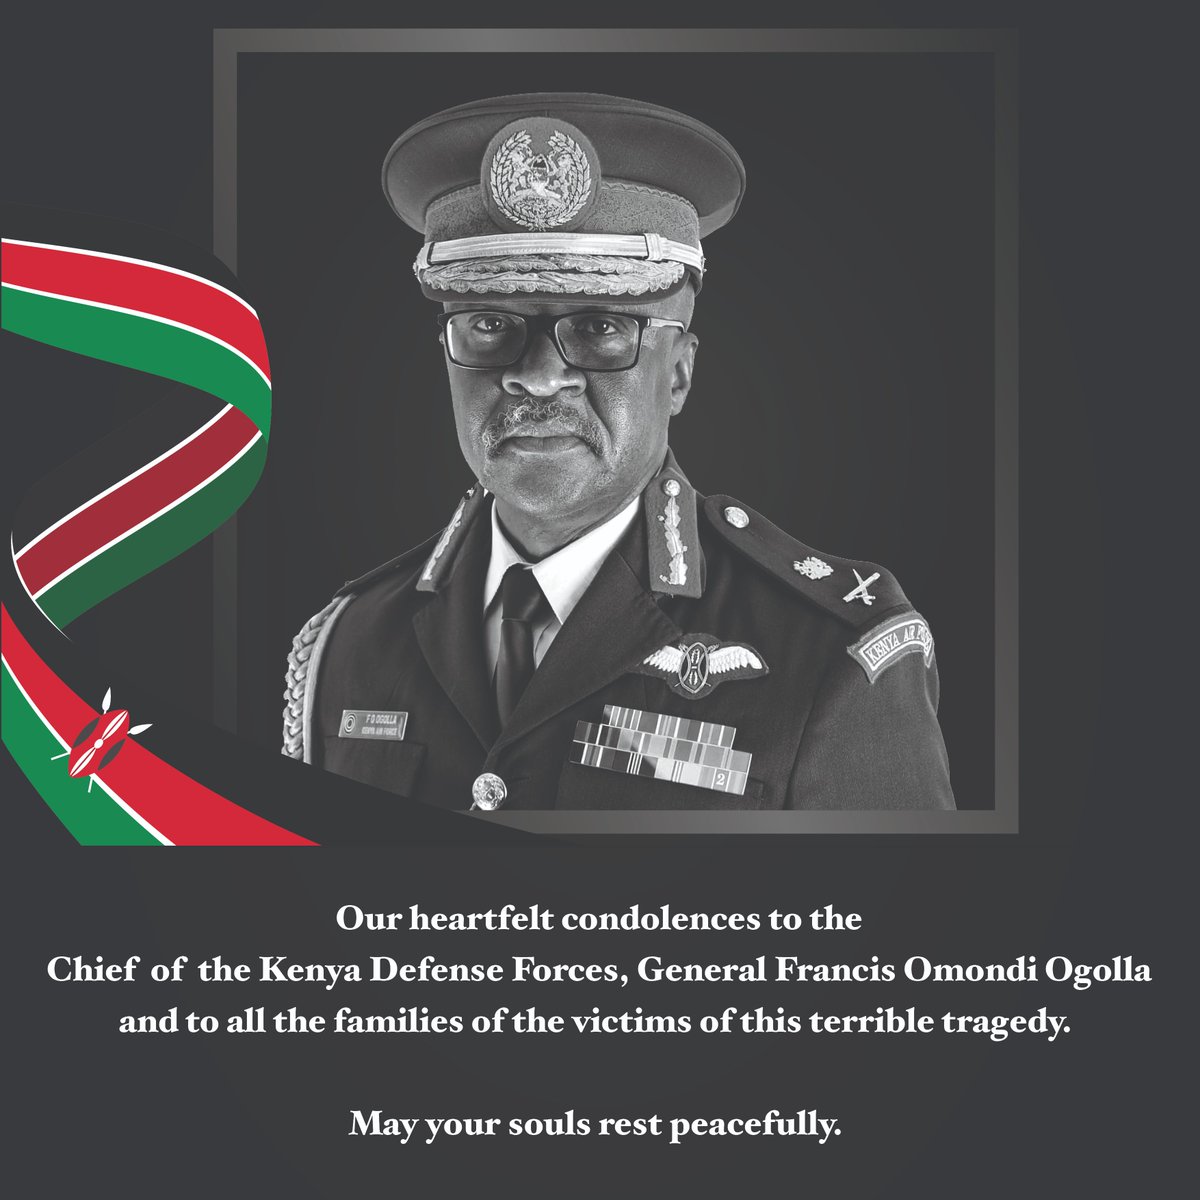 On behalf of the Ministry of Lands, Public Works, Housing & Urban Development. I convey our heartfelt condolences to the Chief of the Kenya Defence Forces, General Francis Omondi Ogolla, and to all the families of the victims who were also onboard. May your souls rest